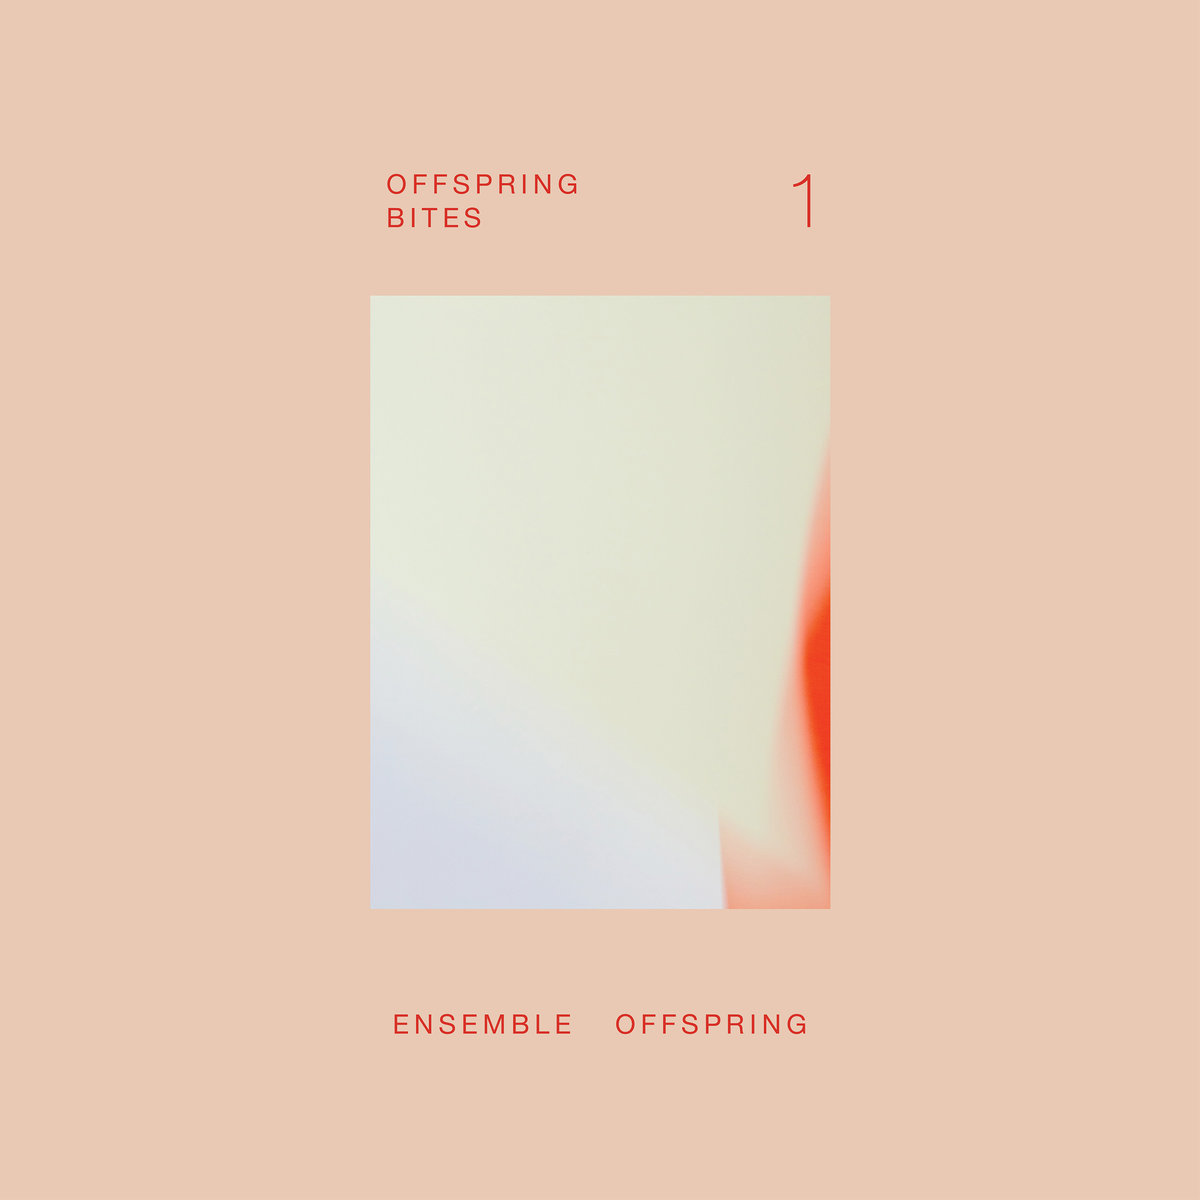 Offspring Bites 1: A New Release From Ensemble Offspring